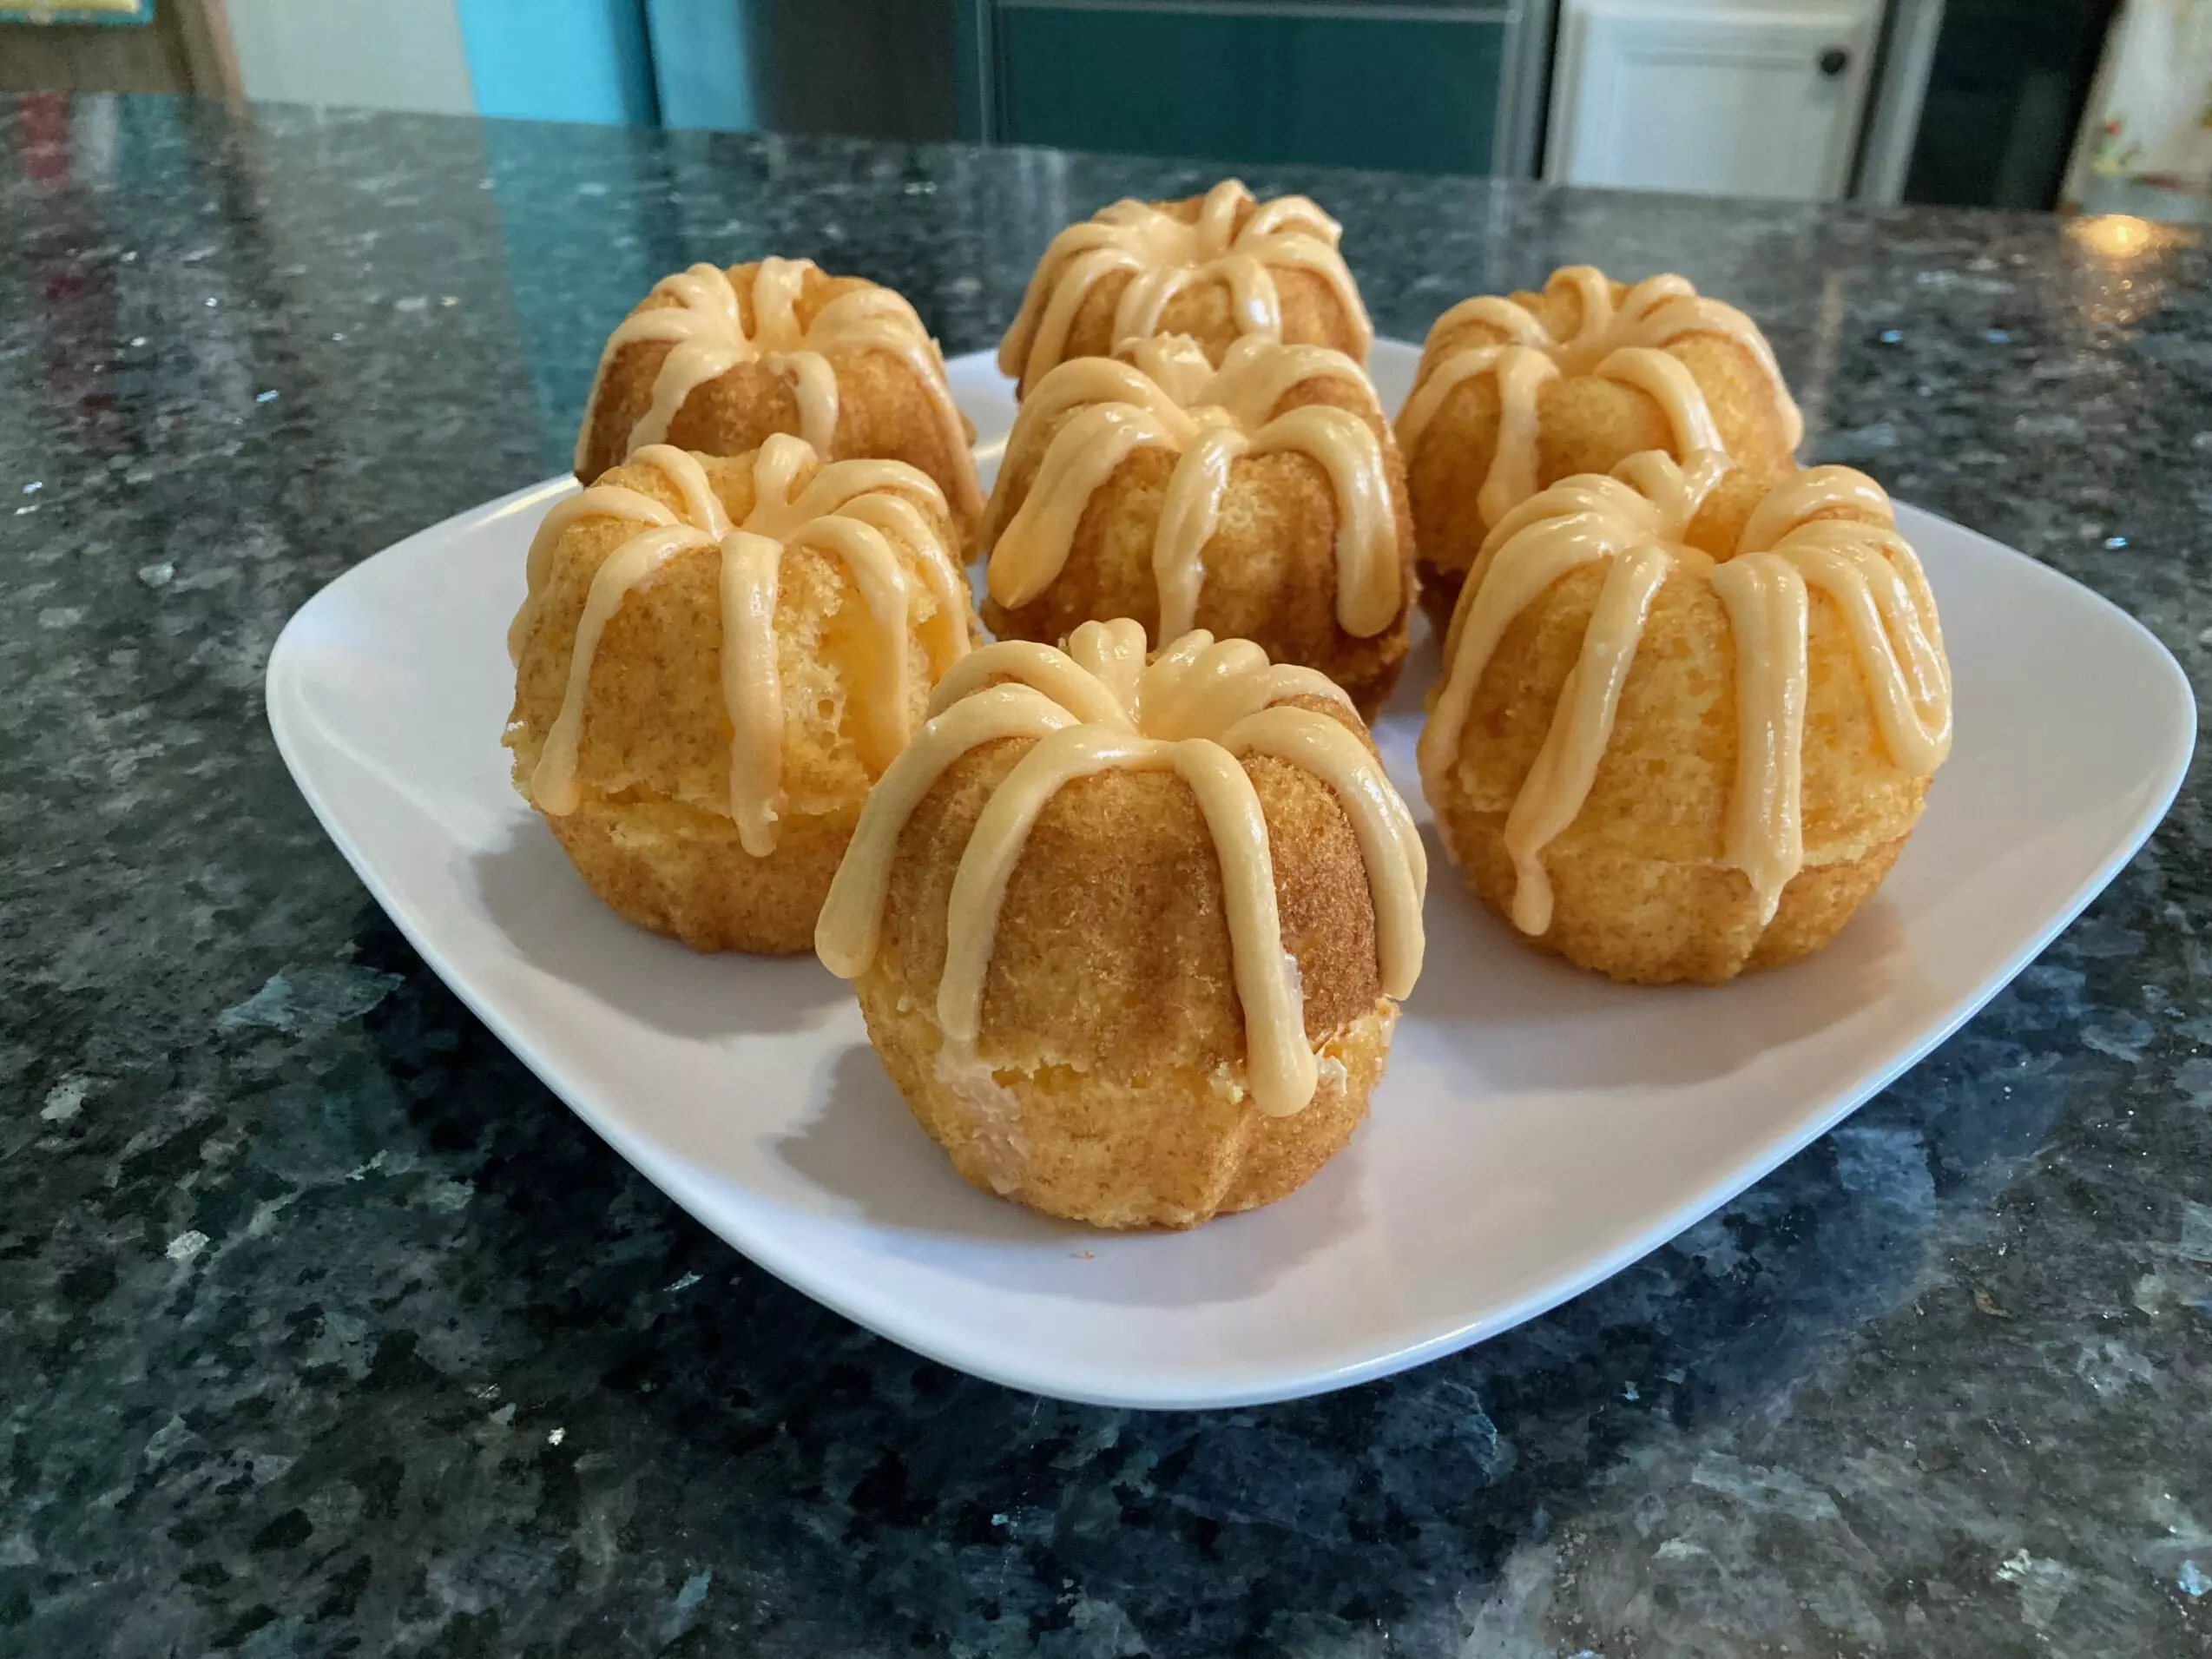 Mini bundt cake pumpkins, iced from Out of the Box Baking.com